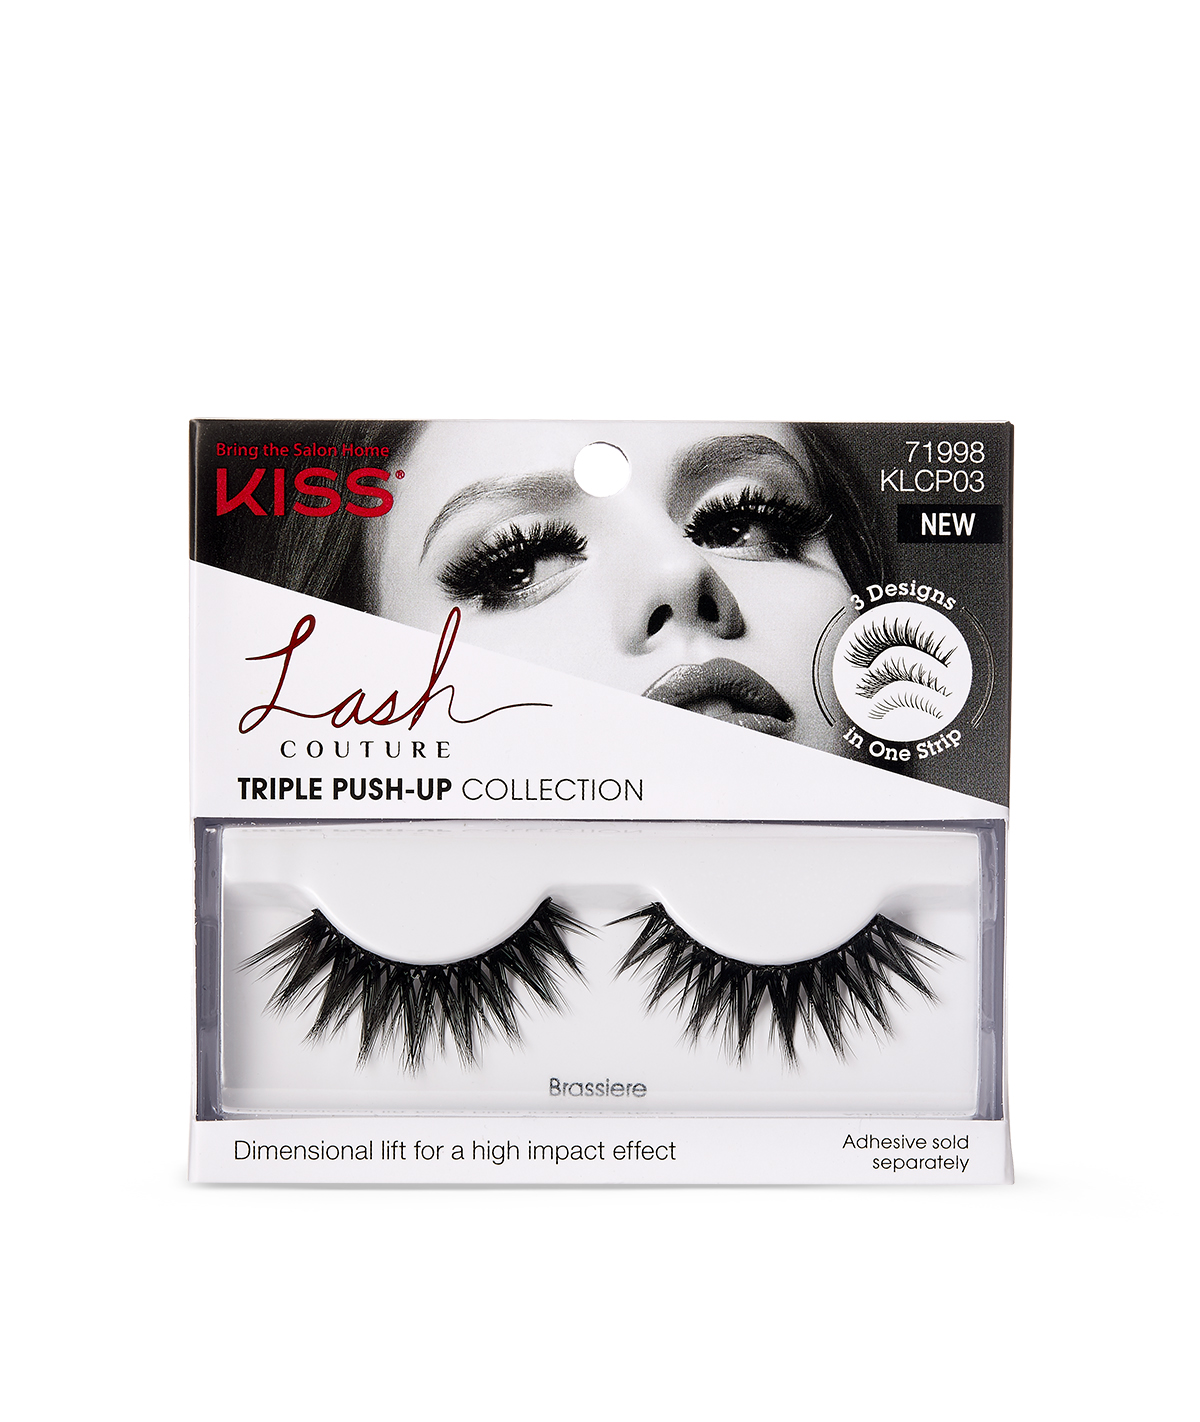 Kiss Lash Couture Triple Push-Up Lashes in Brassiere, 1 pair